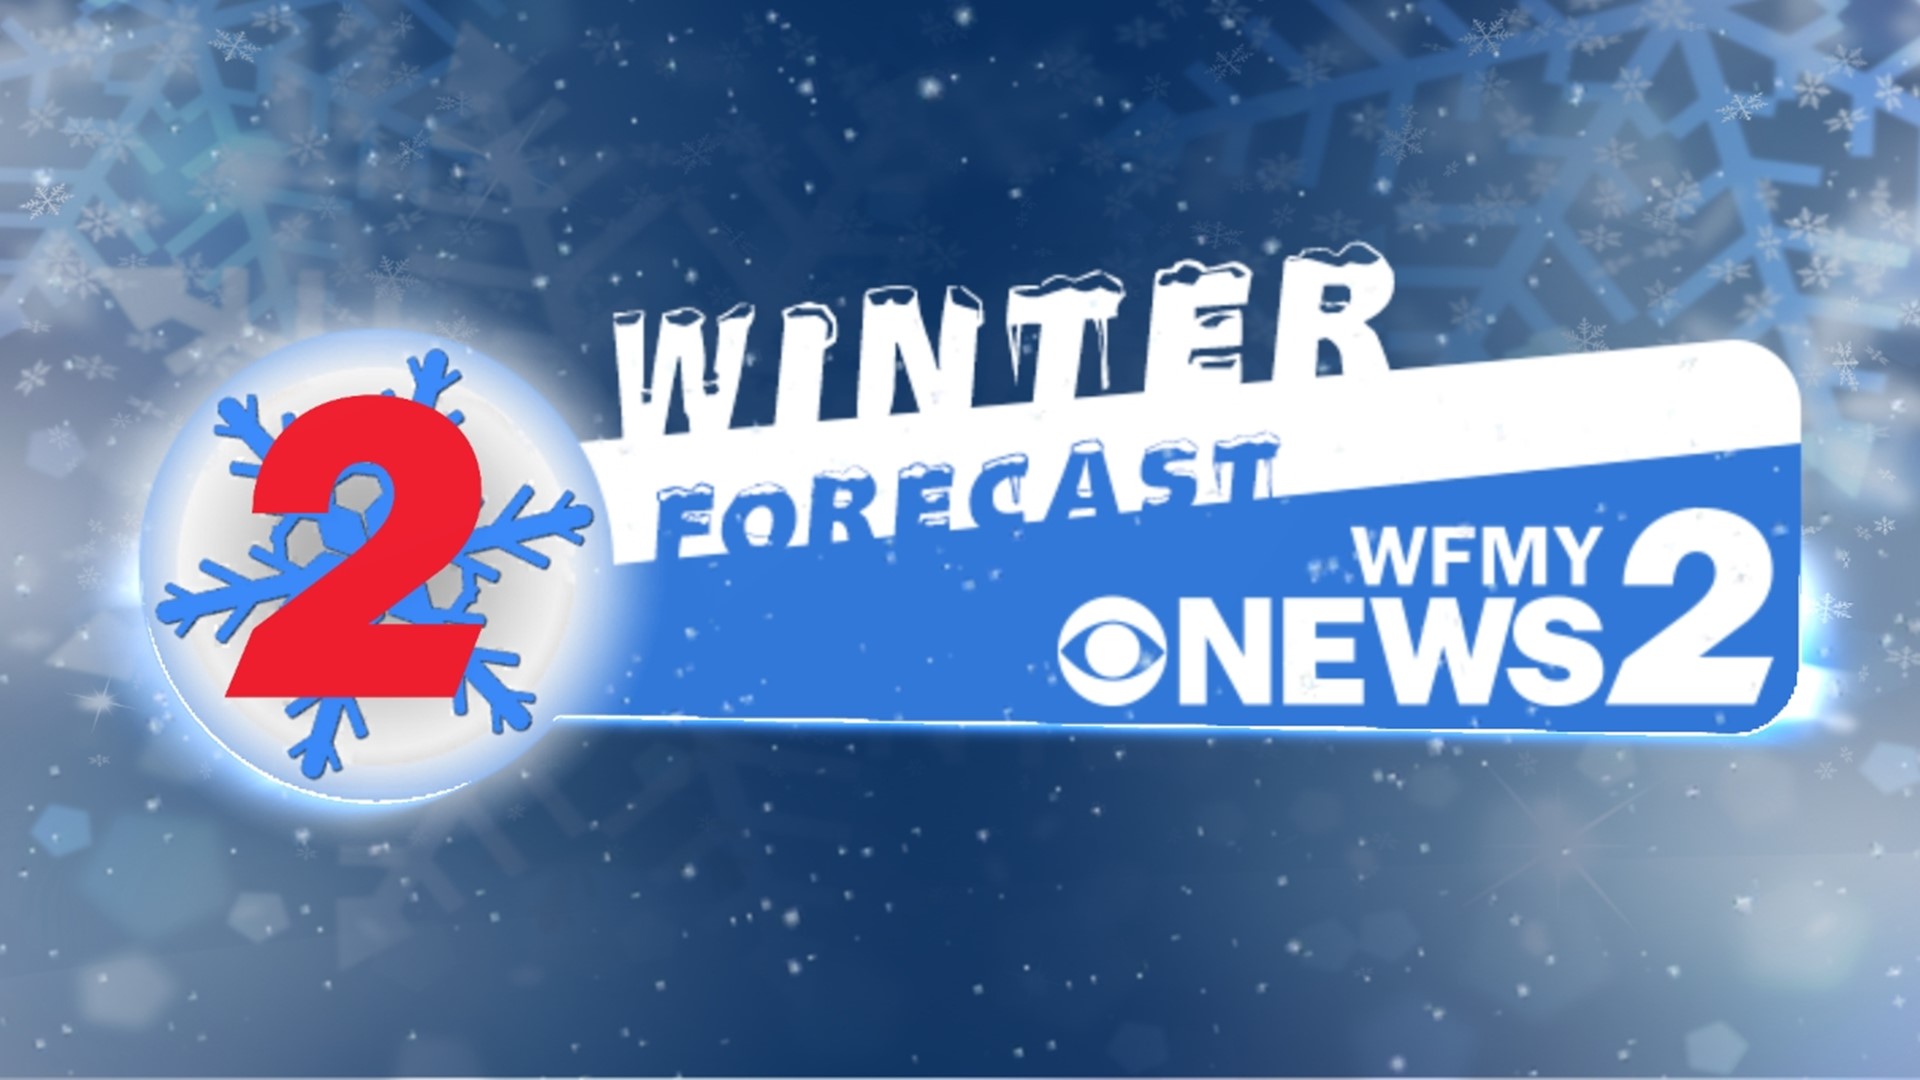 The strongest El Nino in years is shaping up for the winter months. Will it mean that we finally get some snow? The WFMY News 2 Weather Team reveals their forecast.